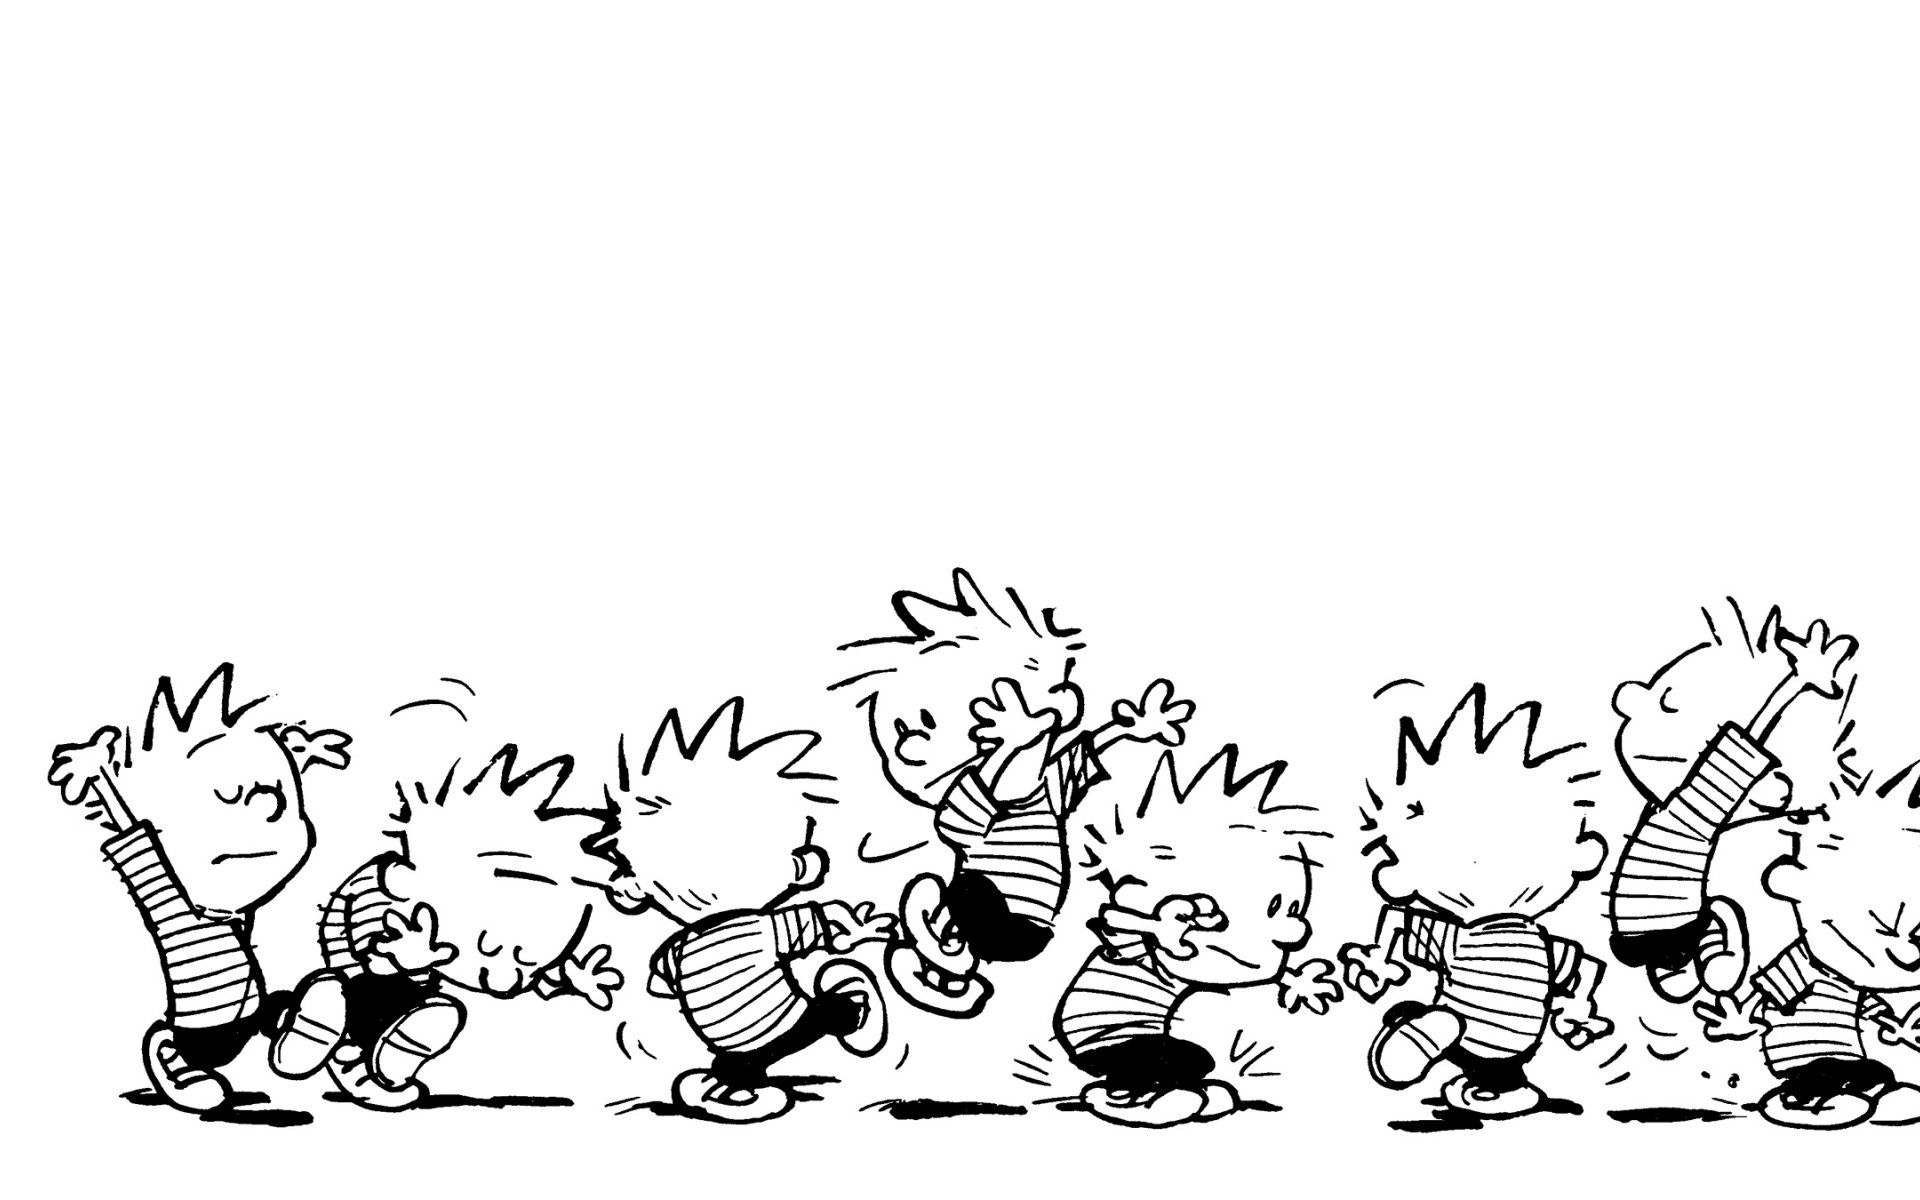 Calvin and Hobbes Wallpaper Black and White